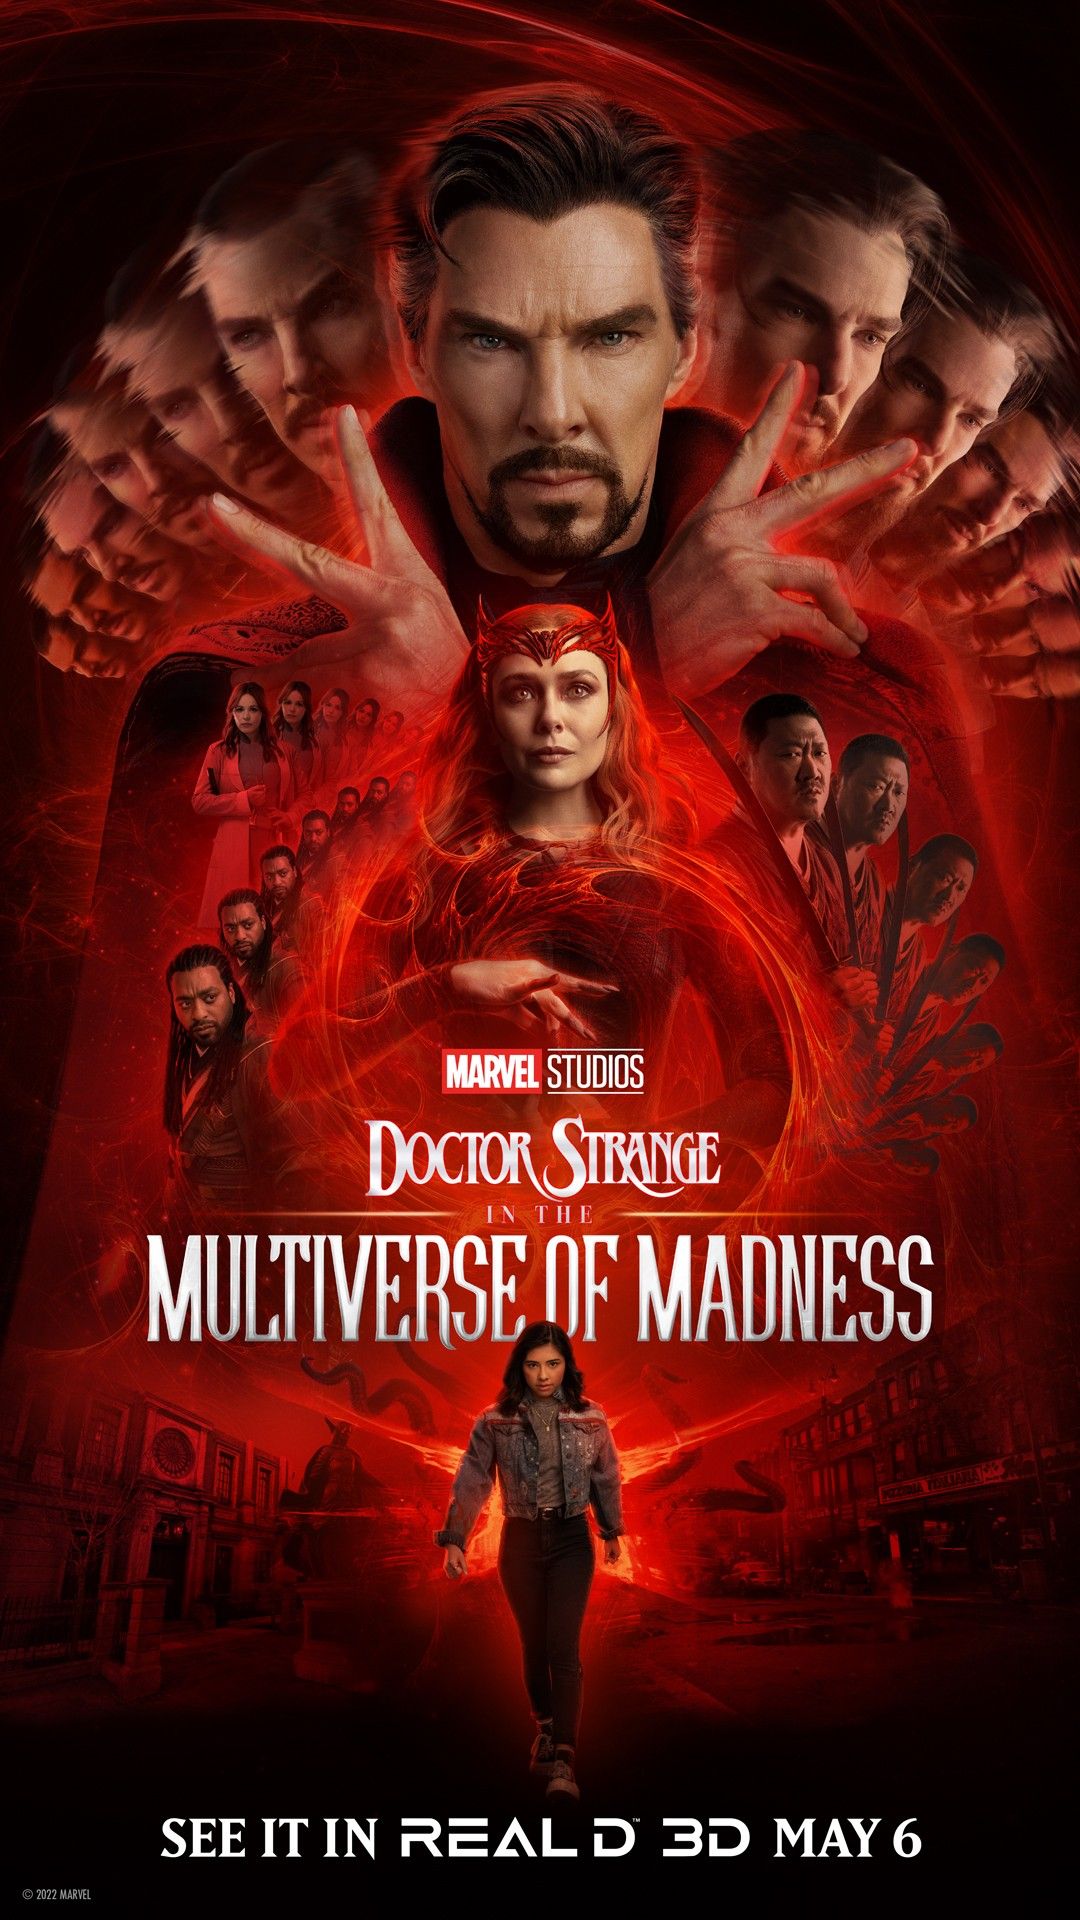 Doctor Strange 2 Multiverse of Madness RealD poster